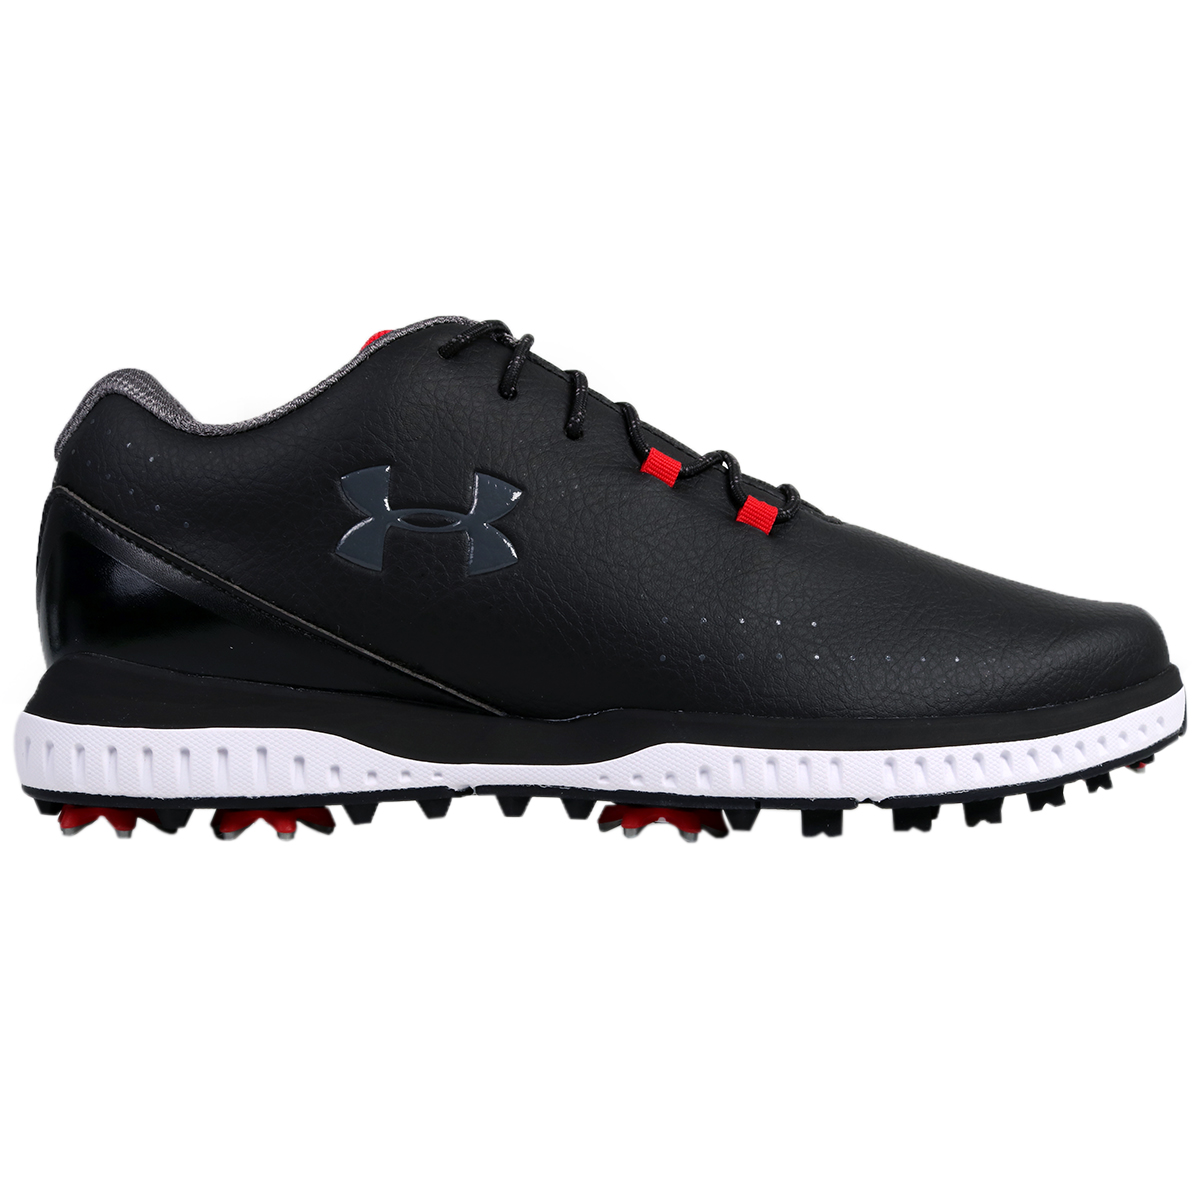 Under Armour Medal RST Shoes from 